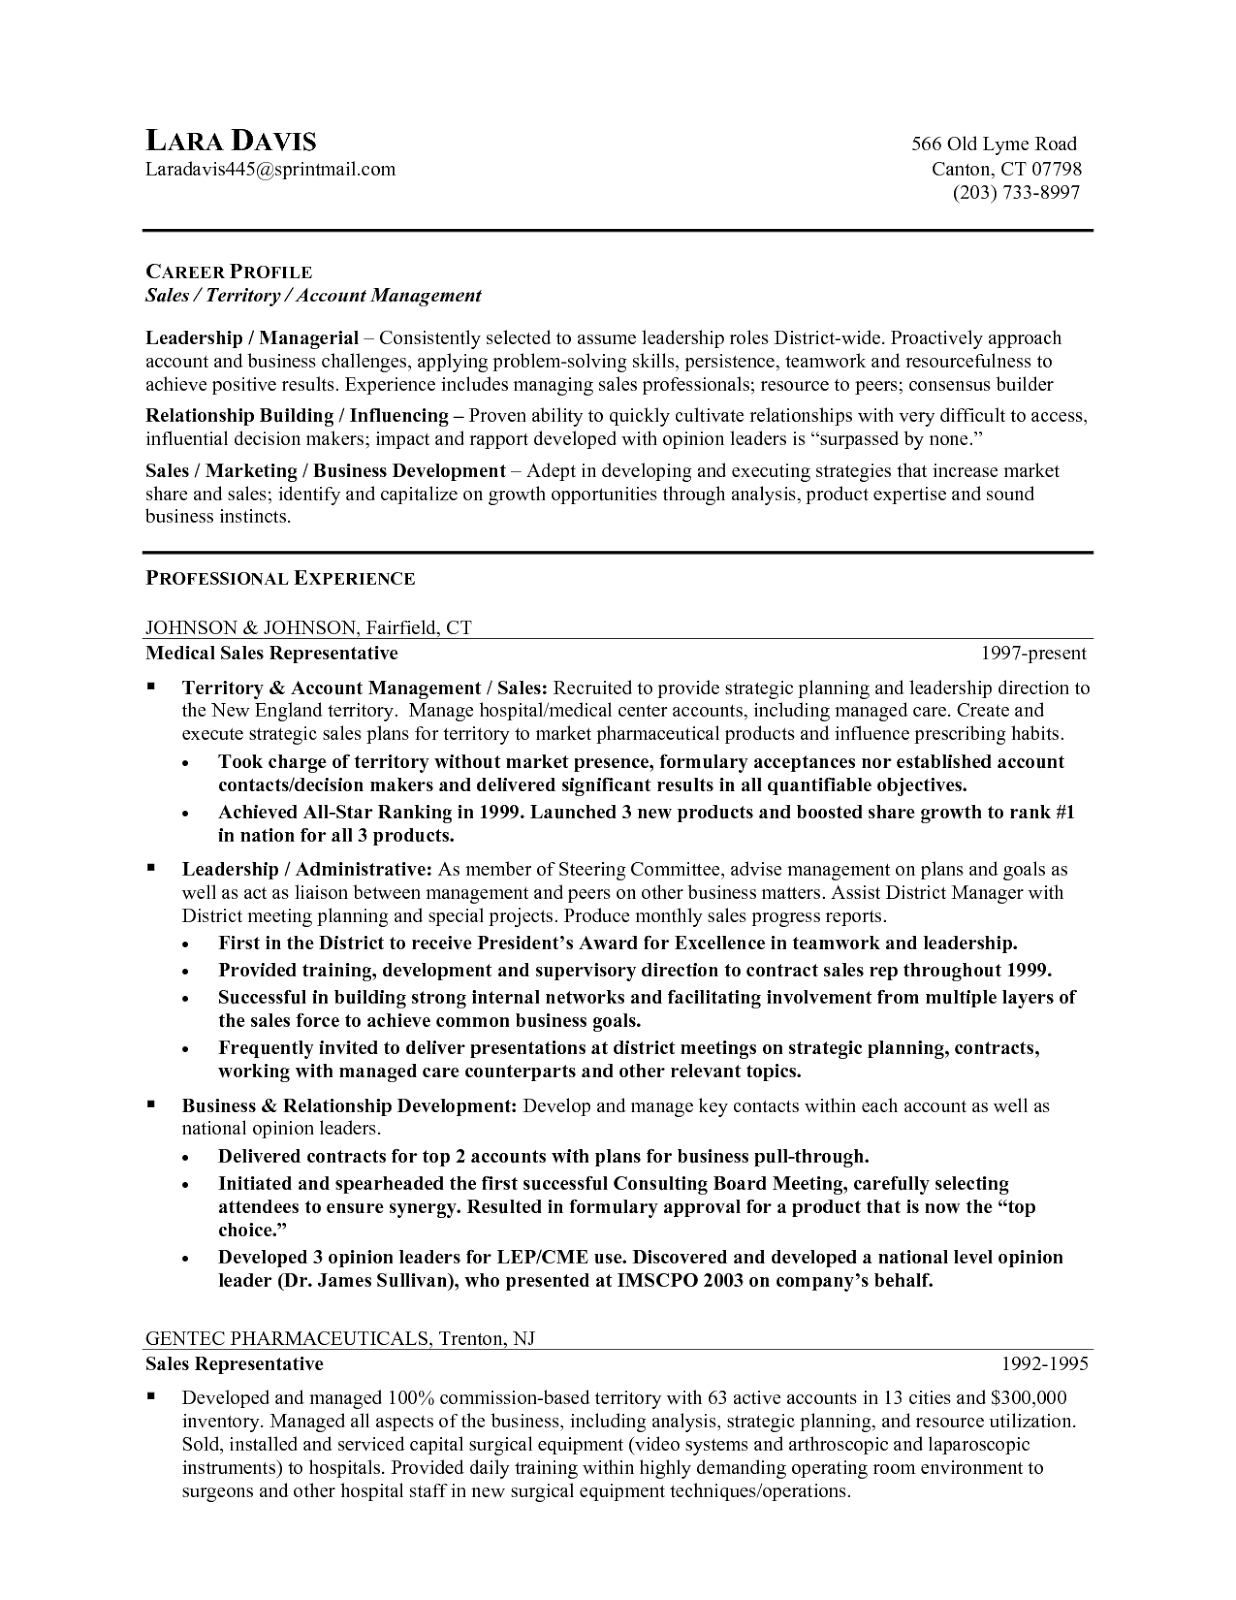 How to write about career objective in resume